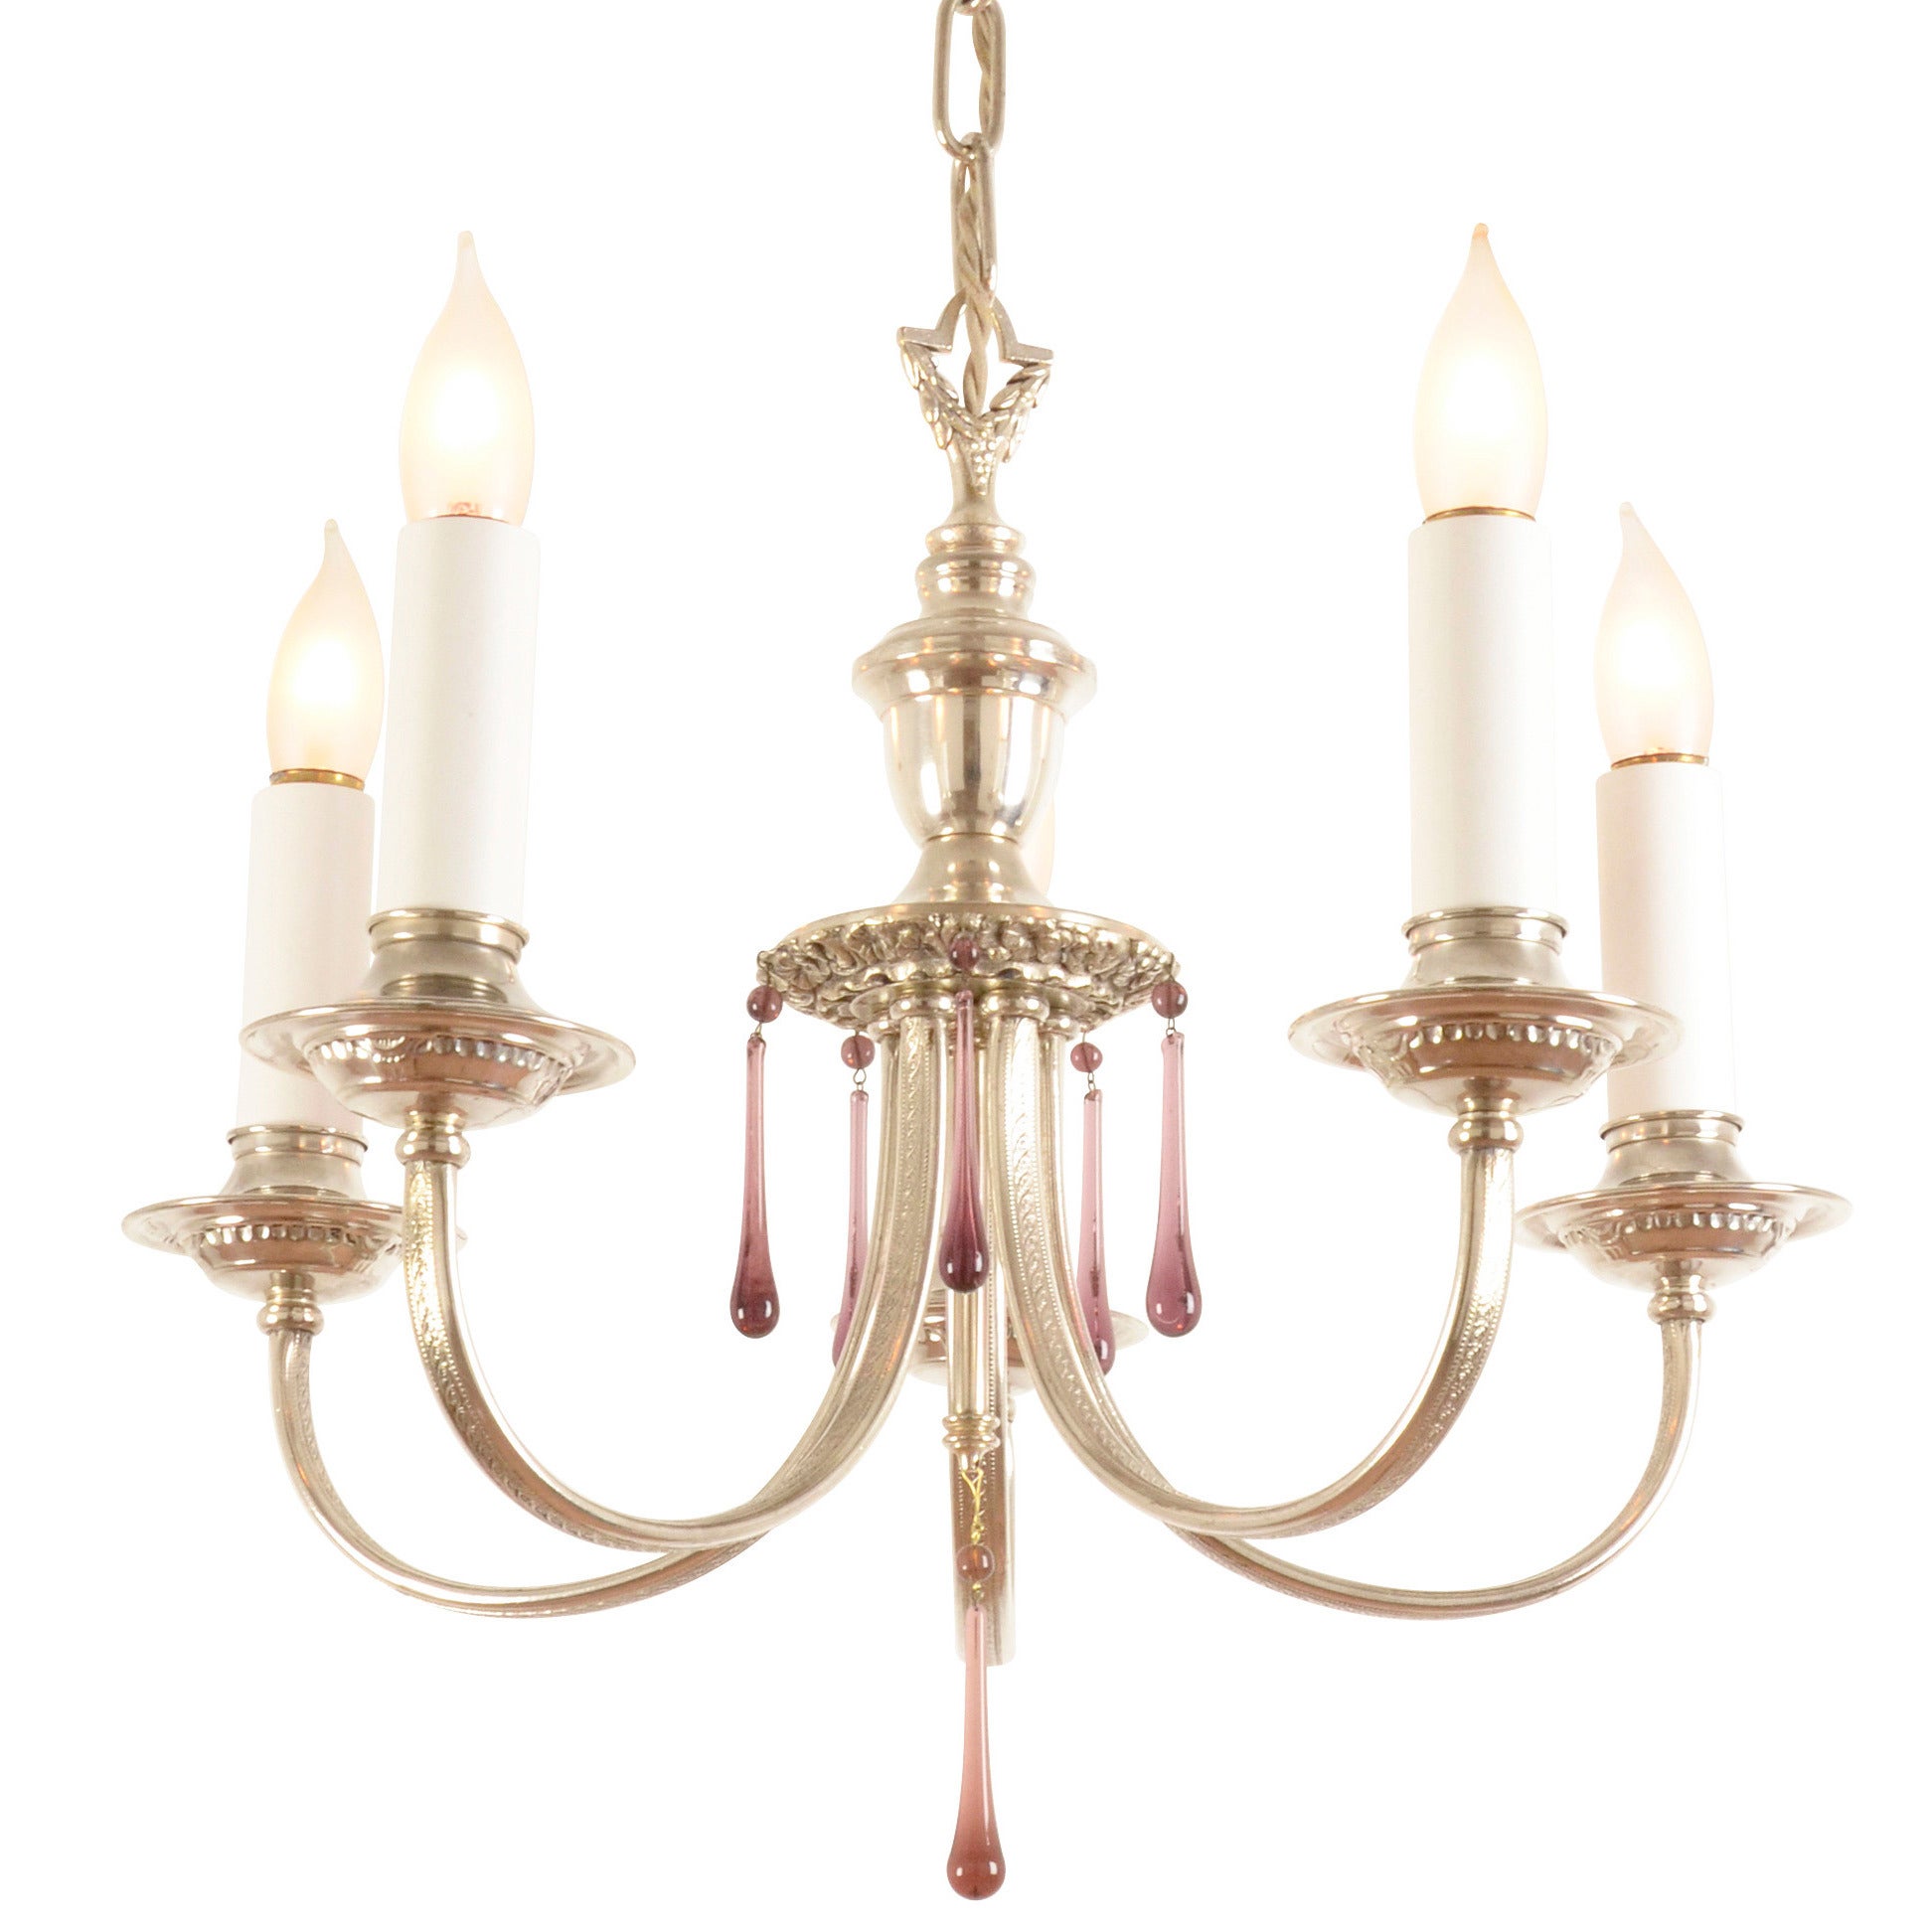 Silver Plated Colonial Revival Chandelier, circa 1925